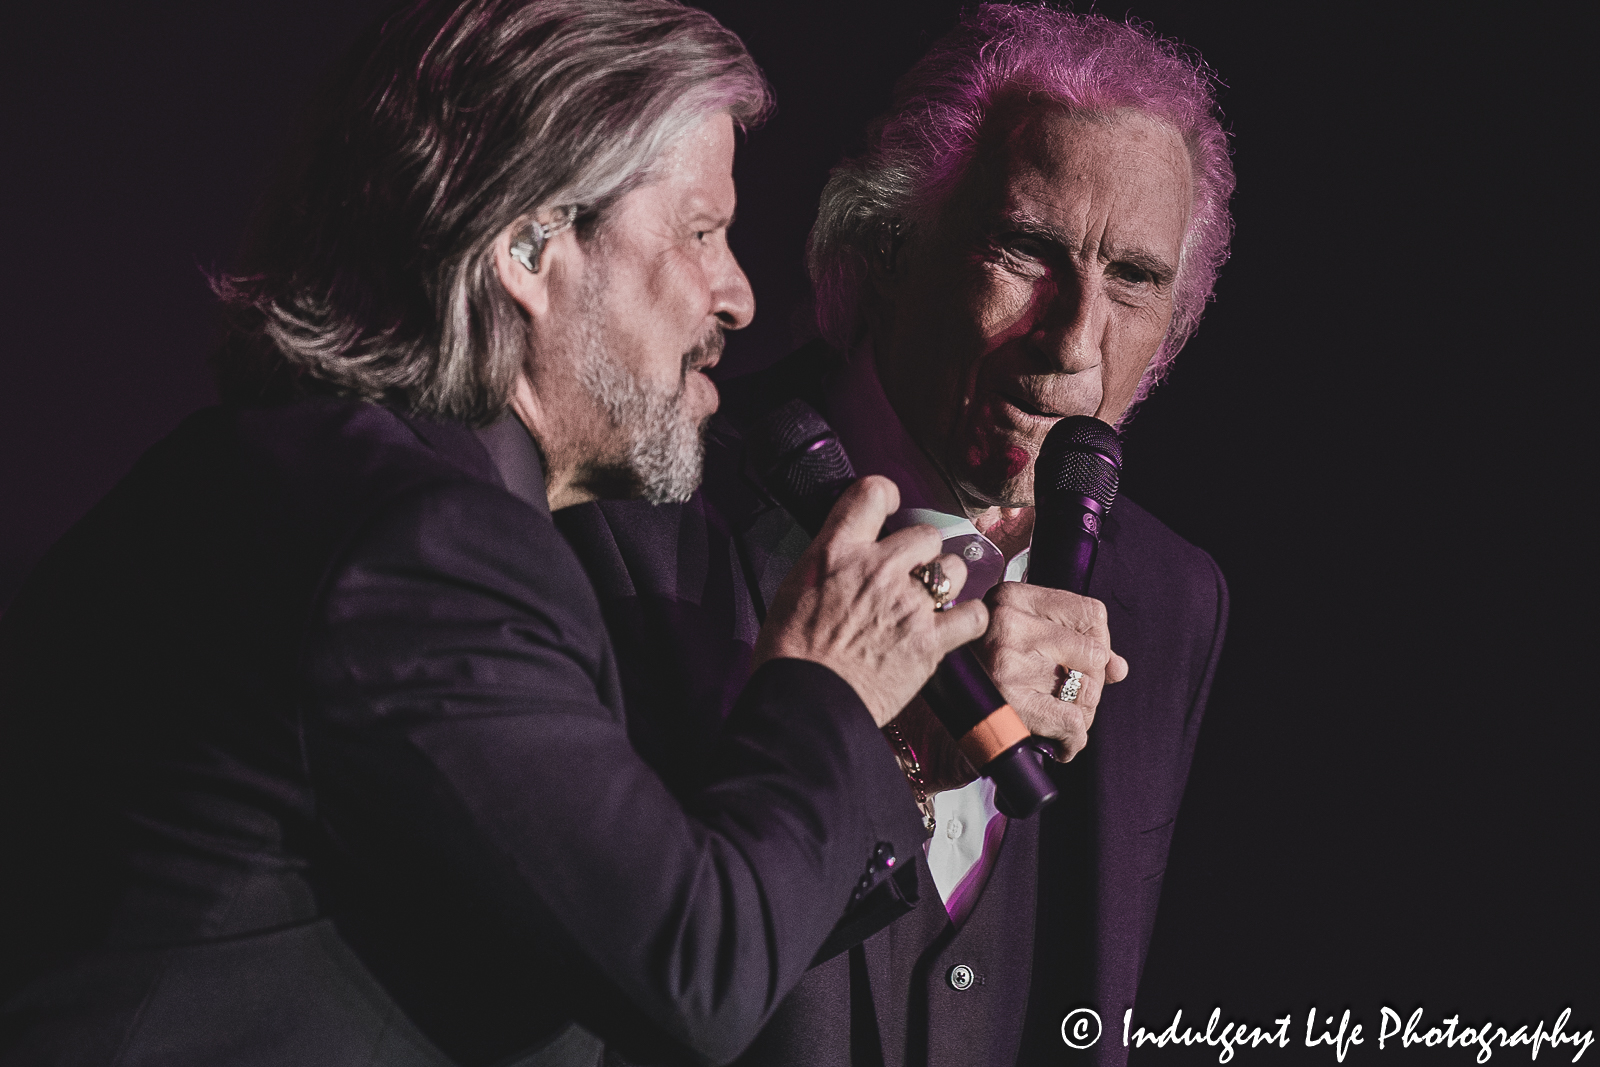 The Righteous Brothers duo of Bill Medley and Bucky Heard performing live at Prairie Band Casino in Mayetta, KS on June 29, 2023.